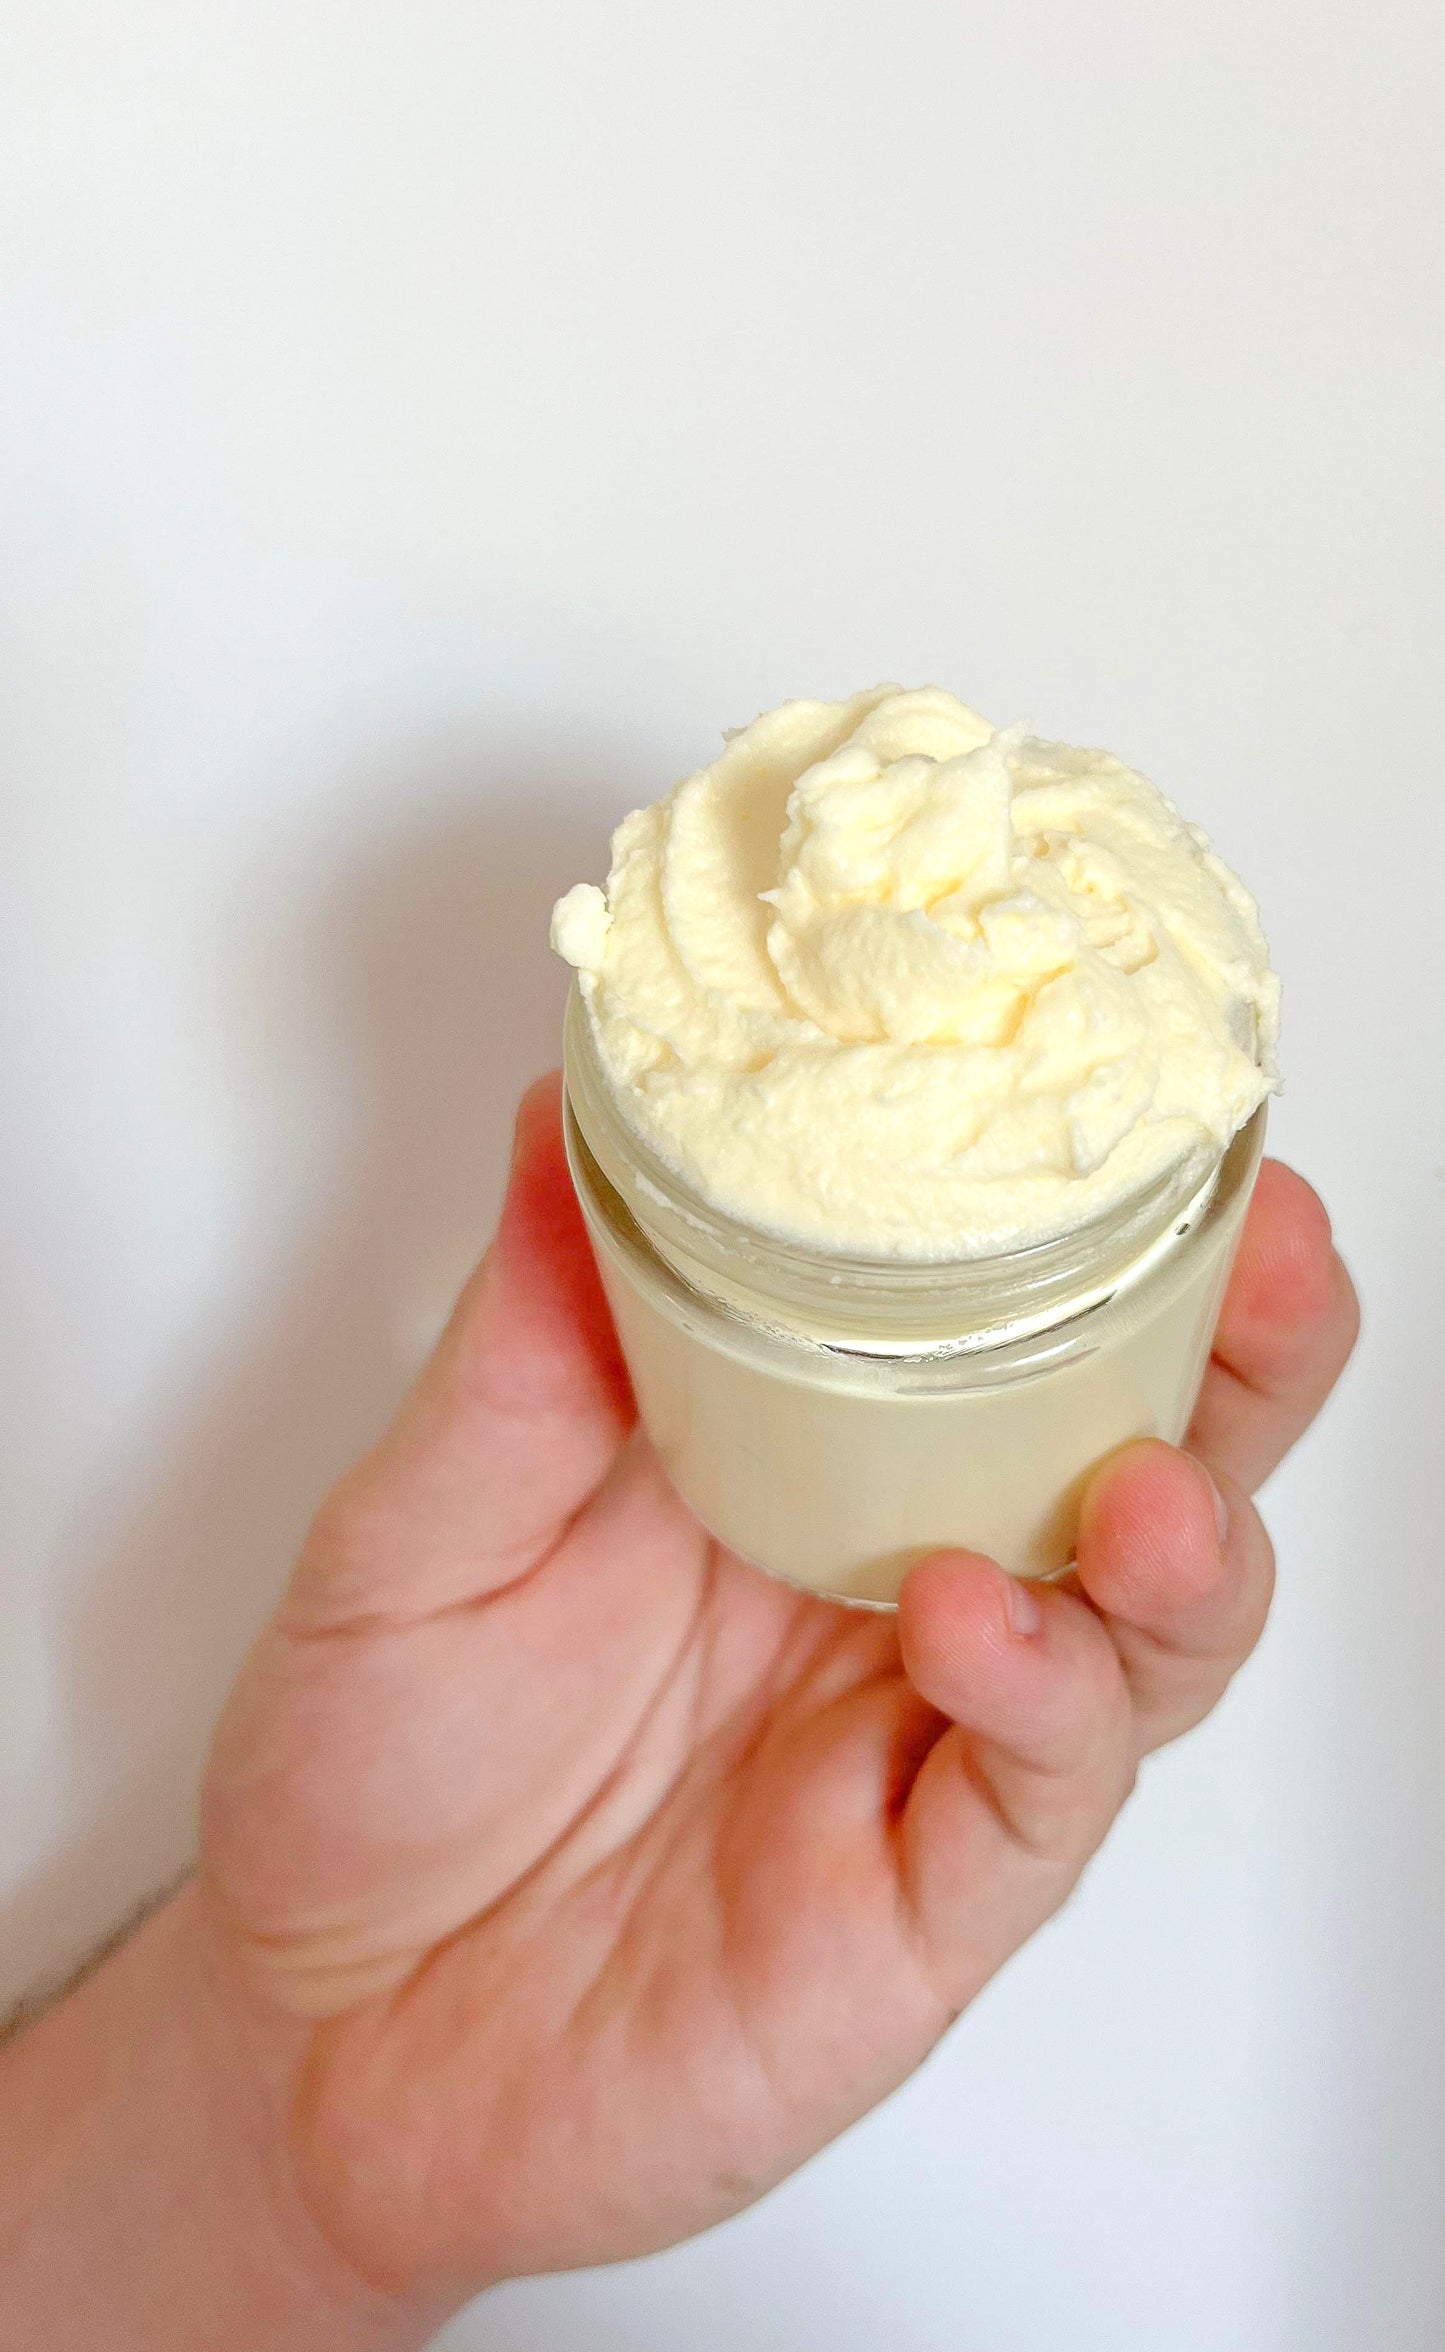 Glass jar of organic whipped tallow moisturizer, perfect for eczema and sensitive skin, grass-fed, Non-GMO, Chemical & Fragrance-Free, deeply nourishing and hydrating"